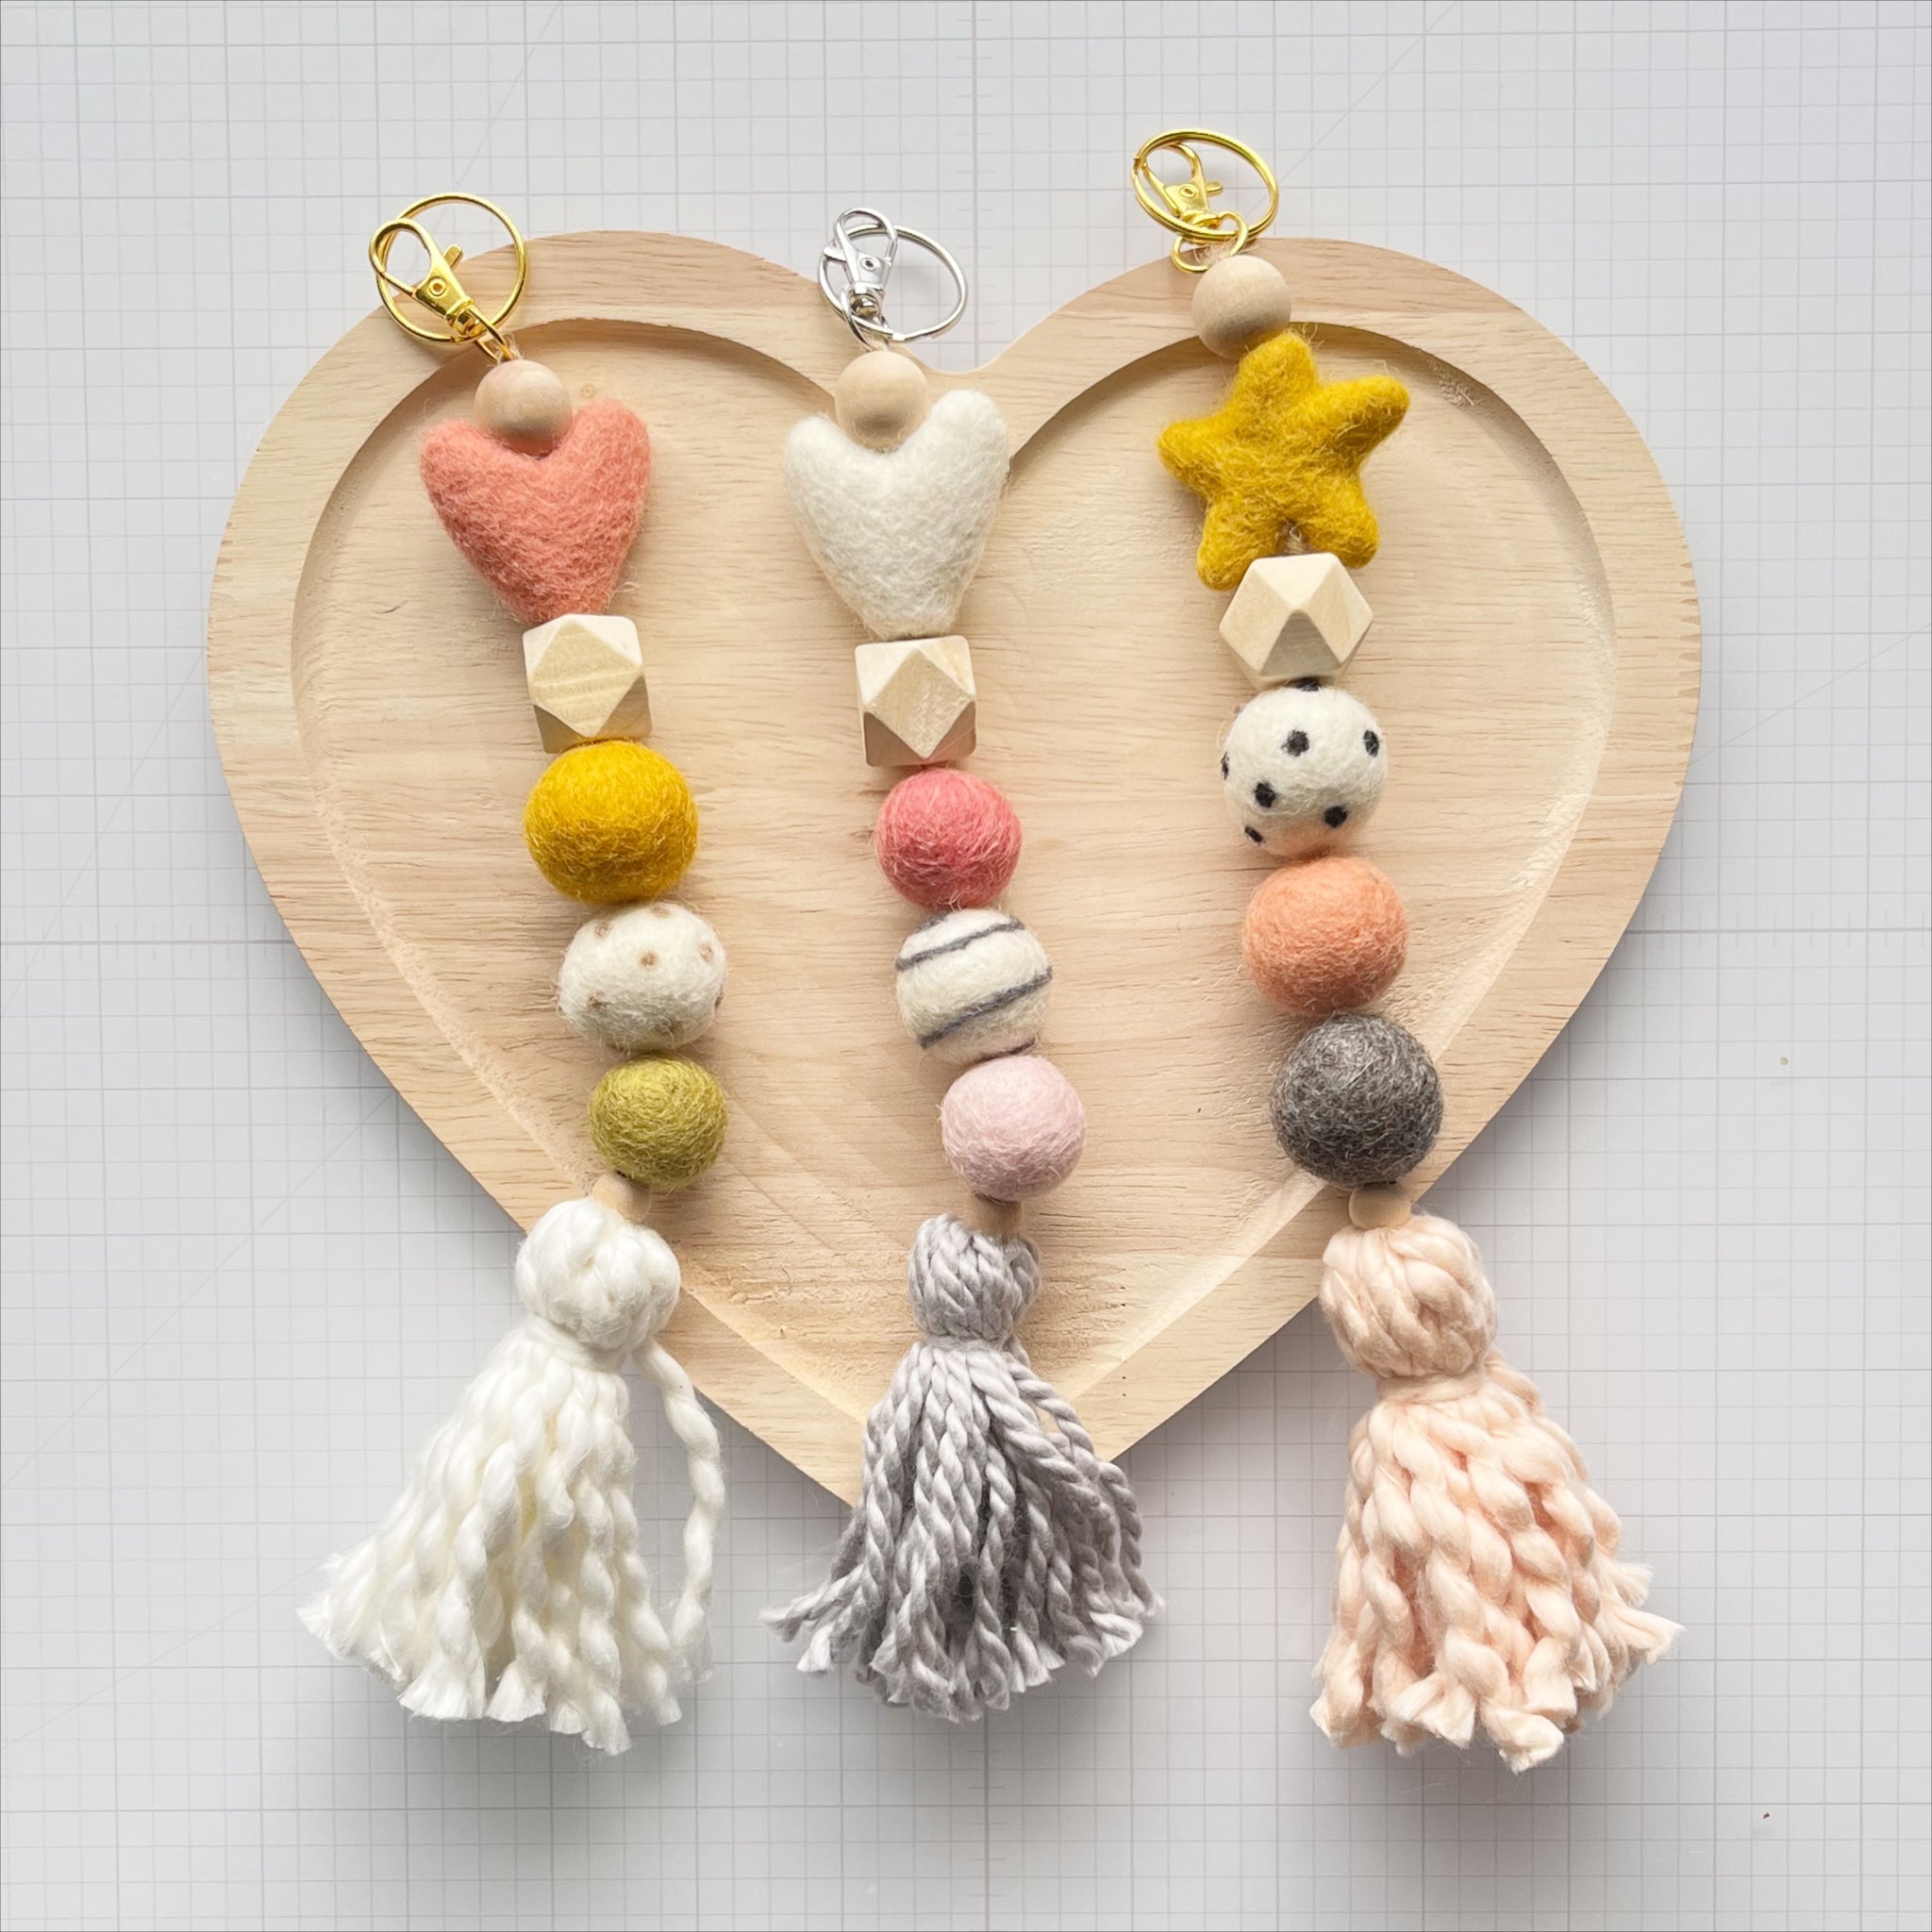 DIY Wooden Bead Keychain - The Sweetest Occasion